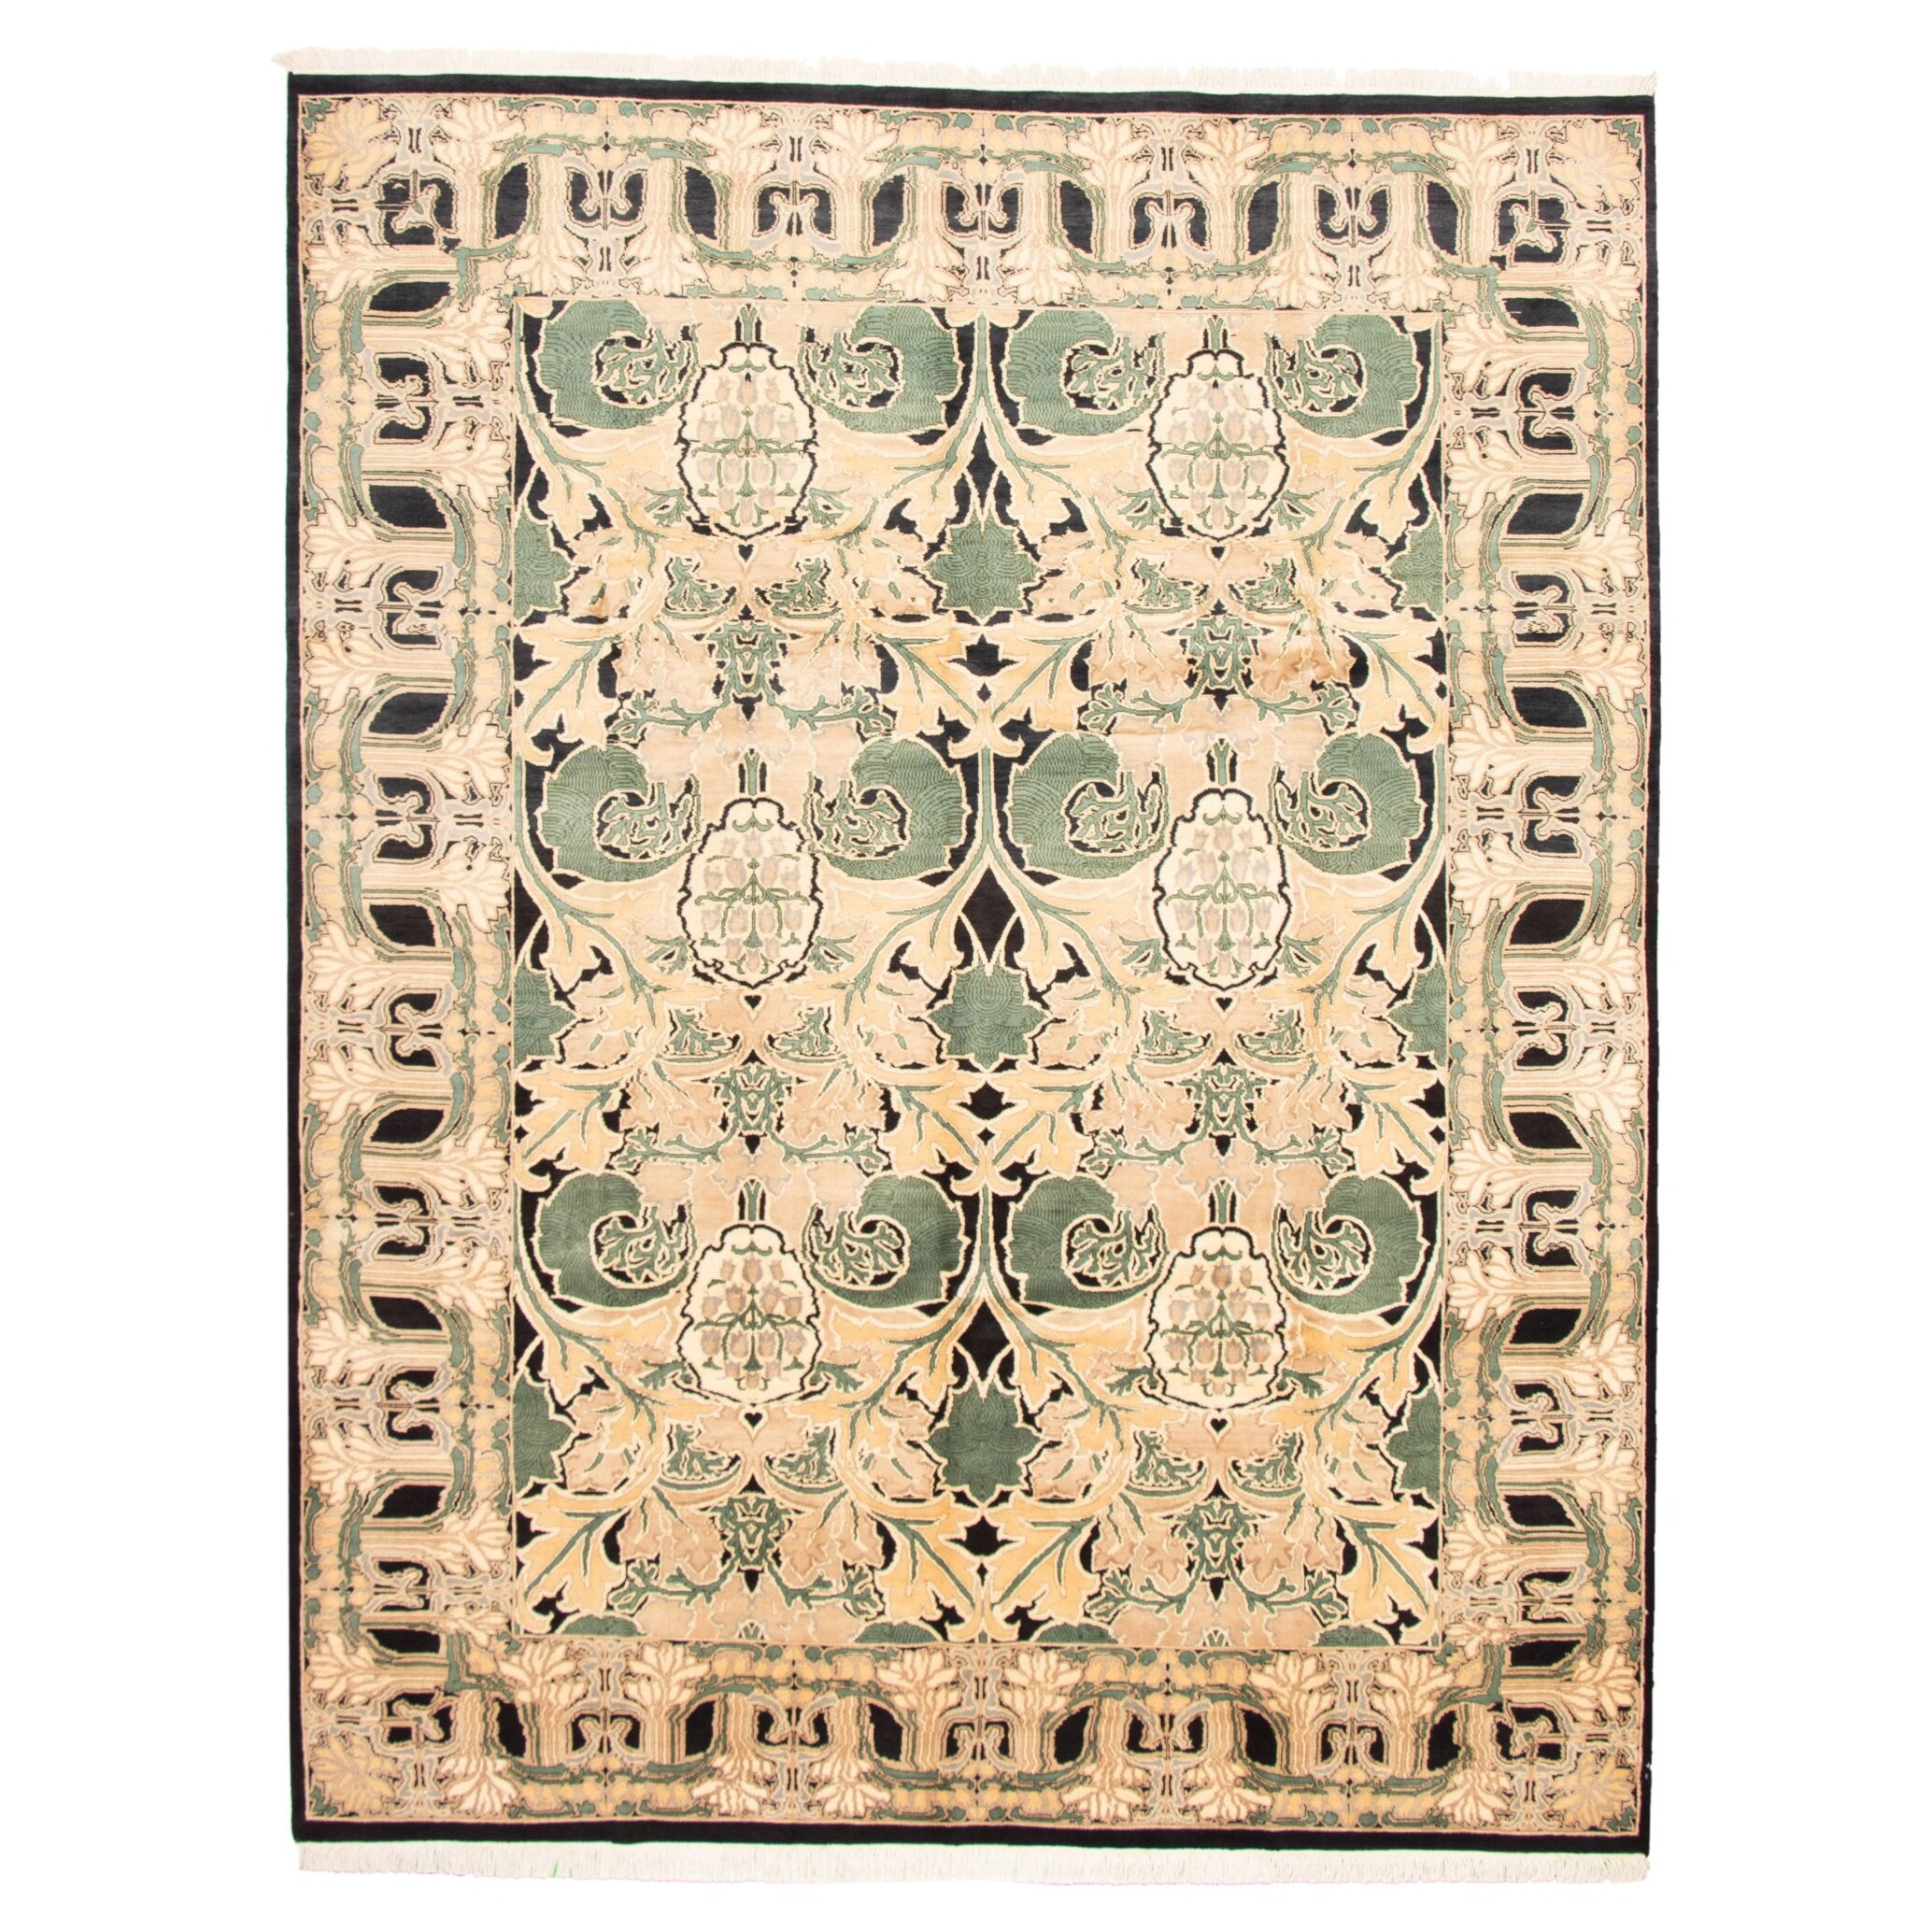 eCarpet Gallery Large Area Rug for Living Room Pako Persian 18/20 Bordered Yellow Rug 9'11 x 9'11 338454 Hand-Knotted Wool Rug Bedroom